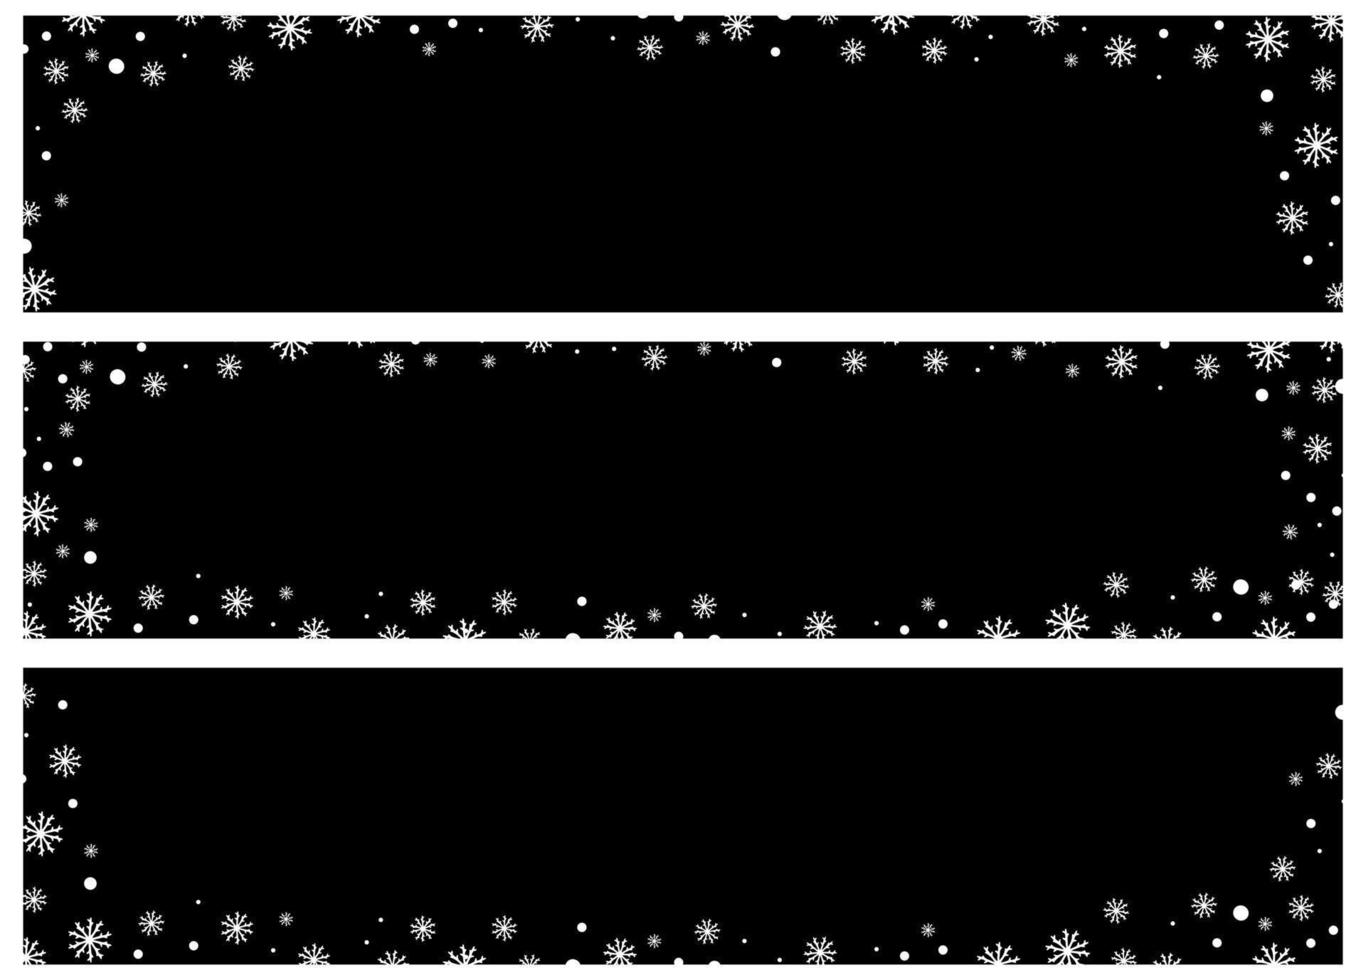 Set of winter banners with black background and white snowflakes vector